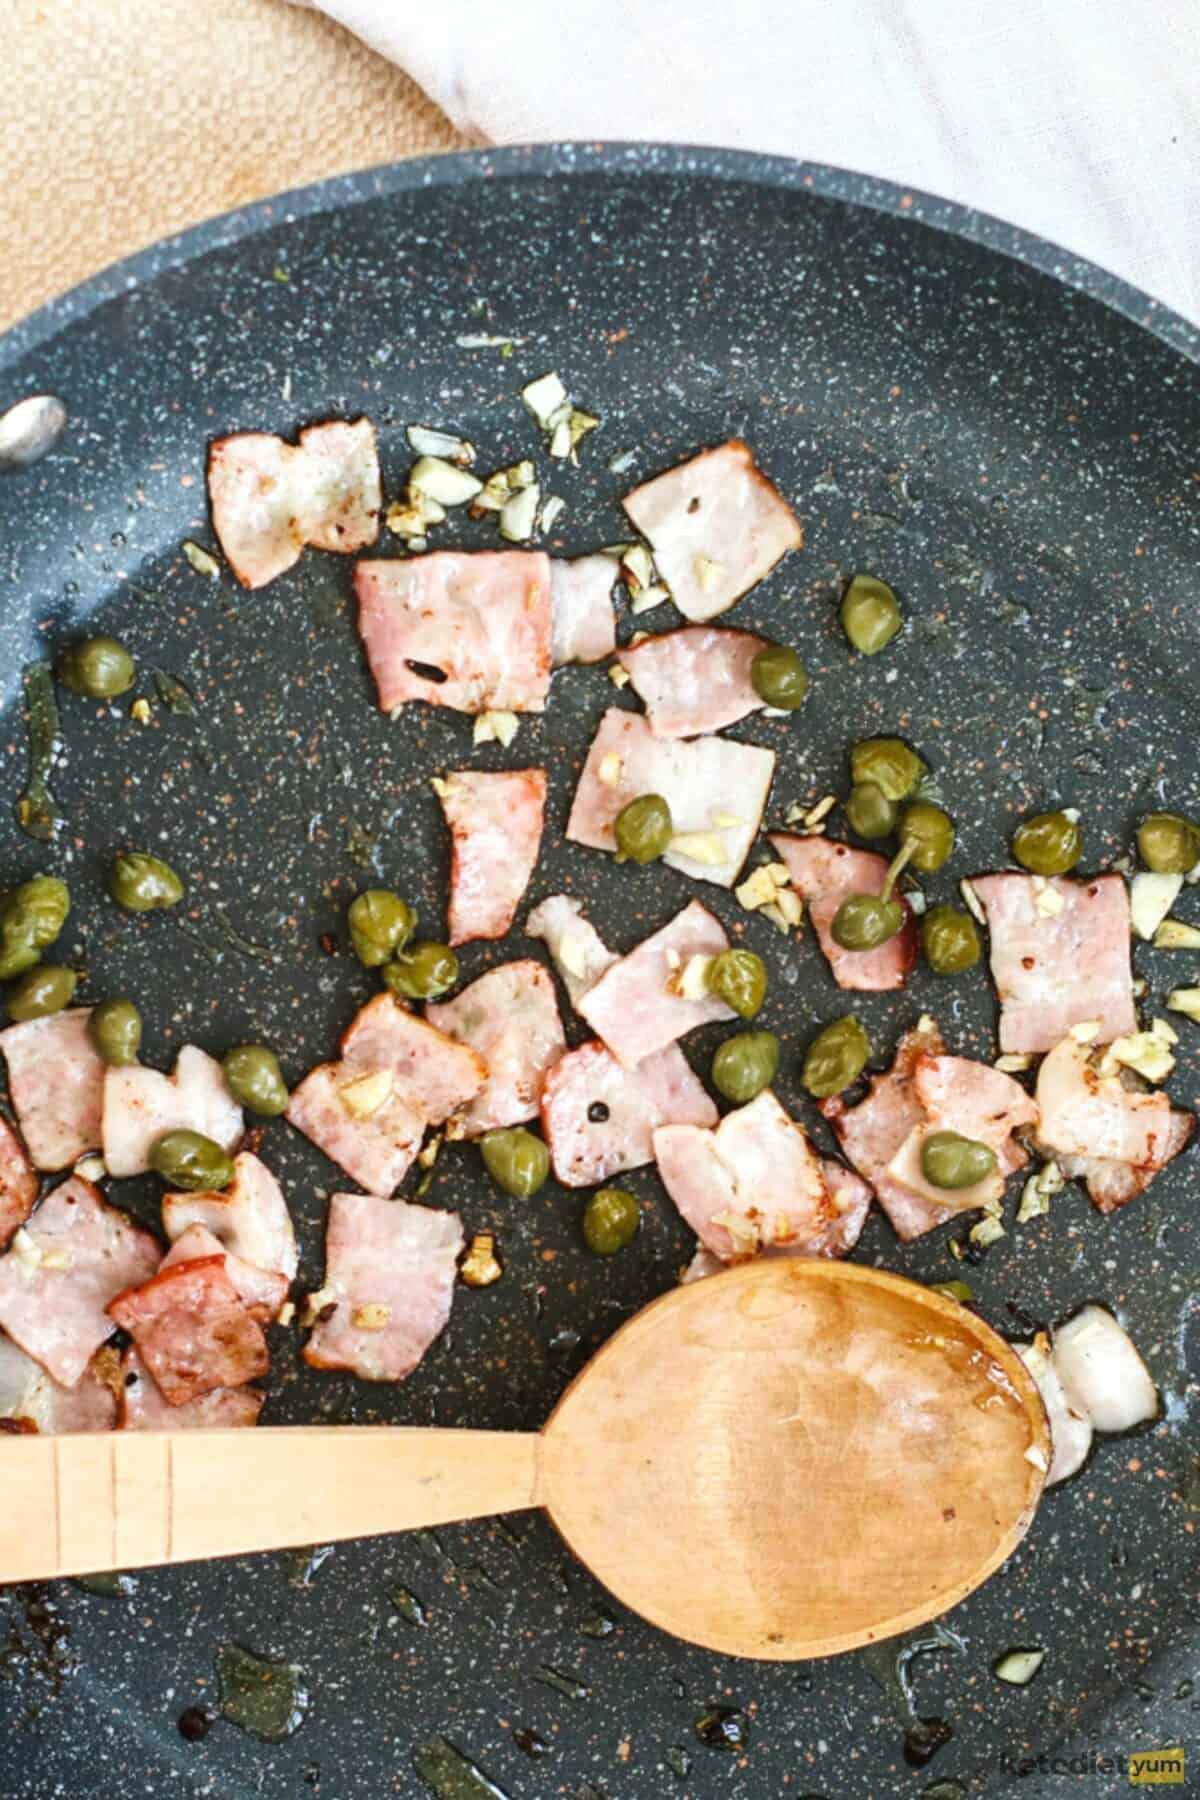 Frying bacon, garlic and capers in olive oil